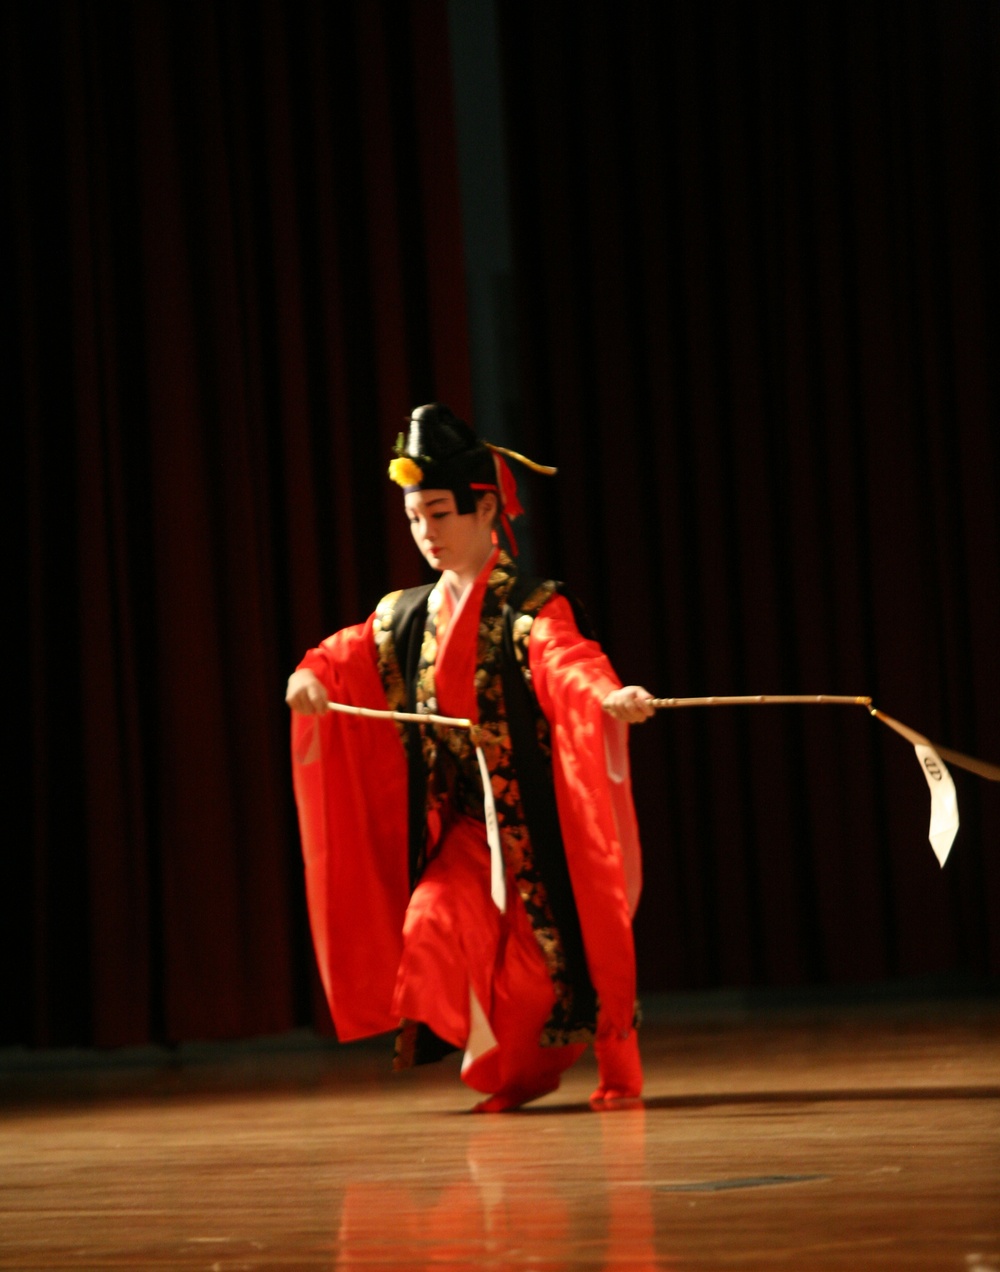 Okinawan dancers bring culture to Camp Foster